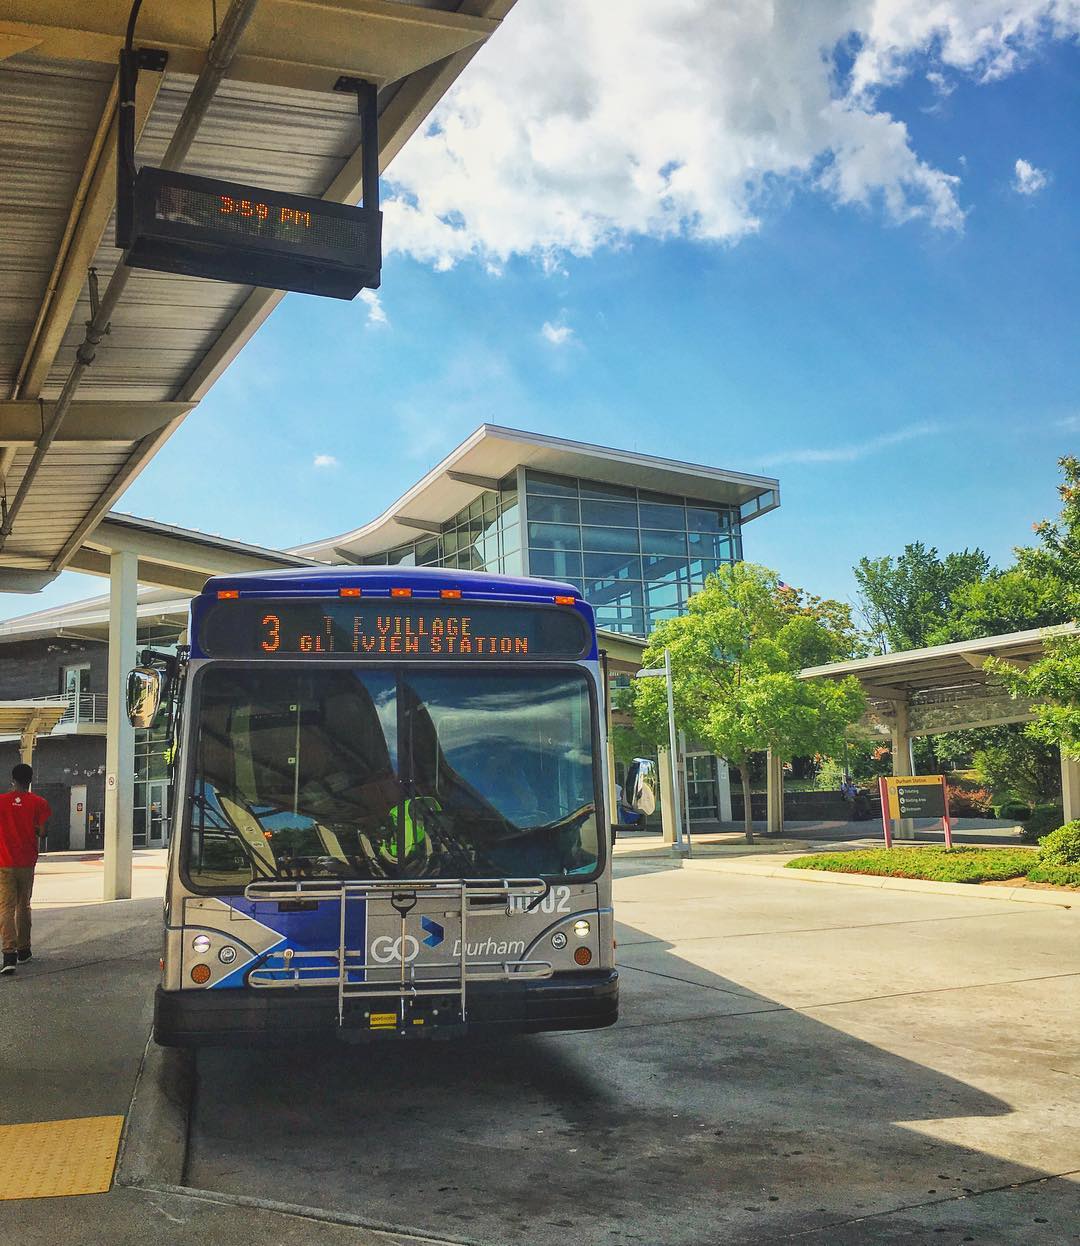 Photo fo the Front of a Bus from Go Durham. Photo by Instagram user @godurhamnc